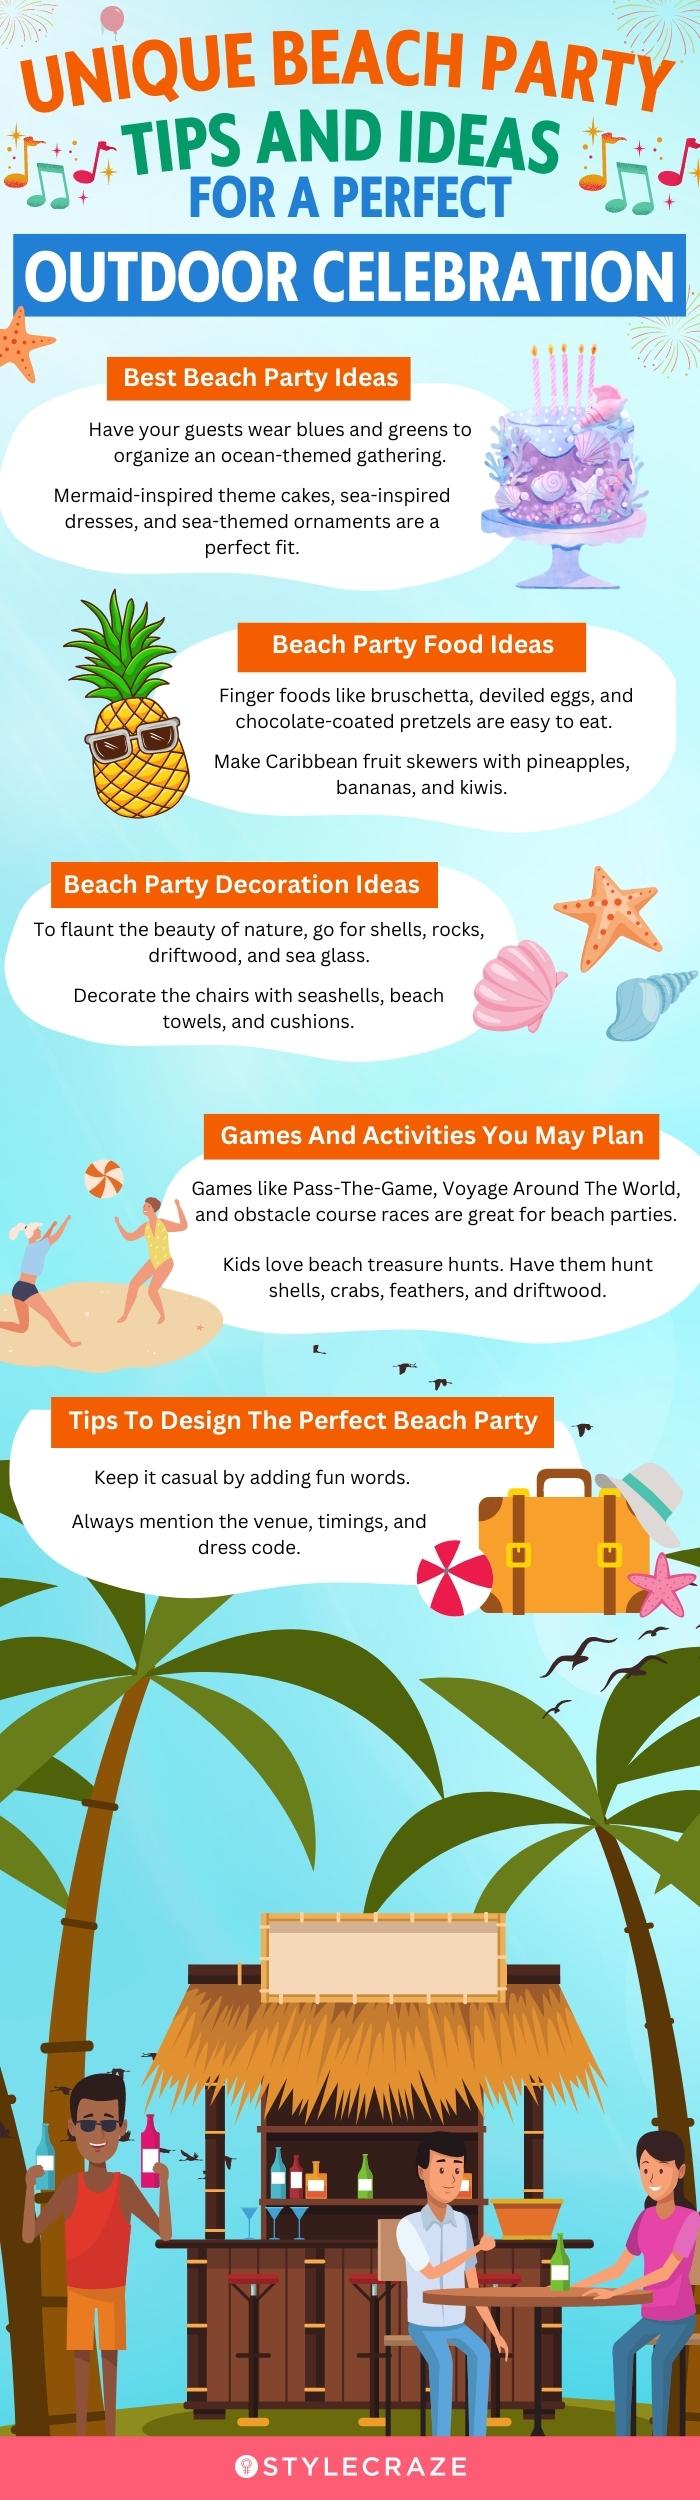 unique beach party tips and ideas for a perfect outdoor celebration (infographic)